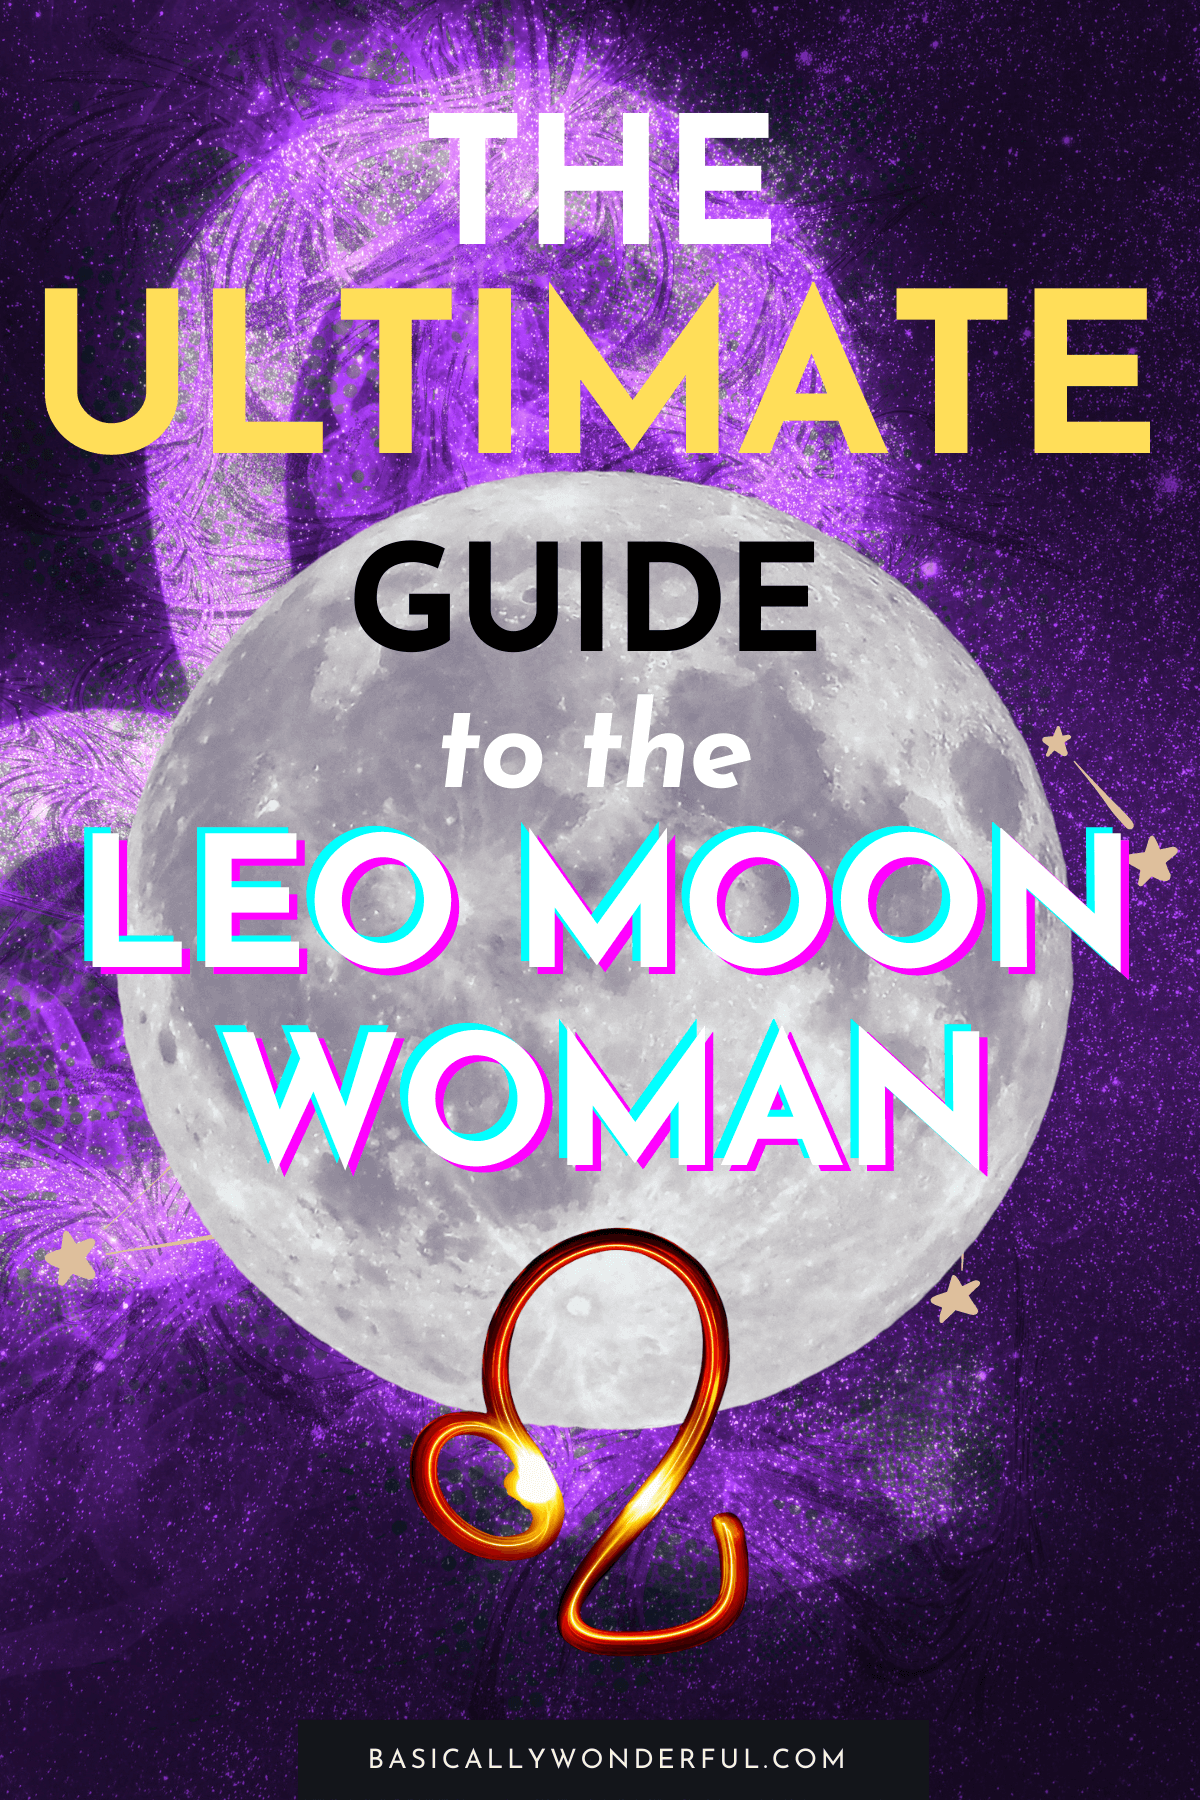 The Leo Moon Woman is Absolutely Fabulous Basically Wonderful